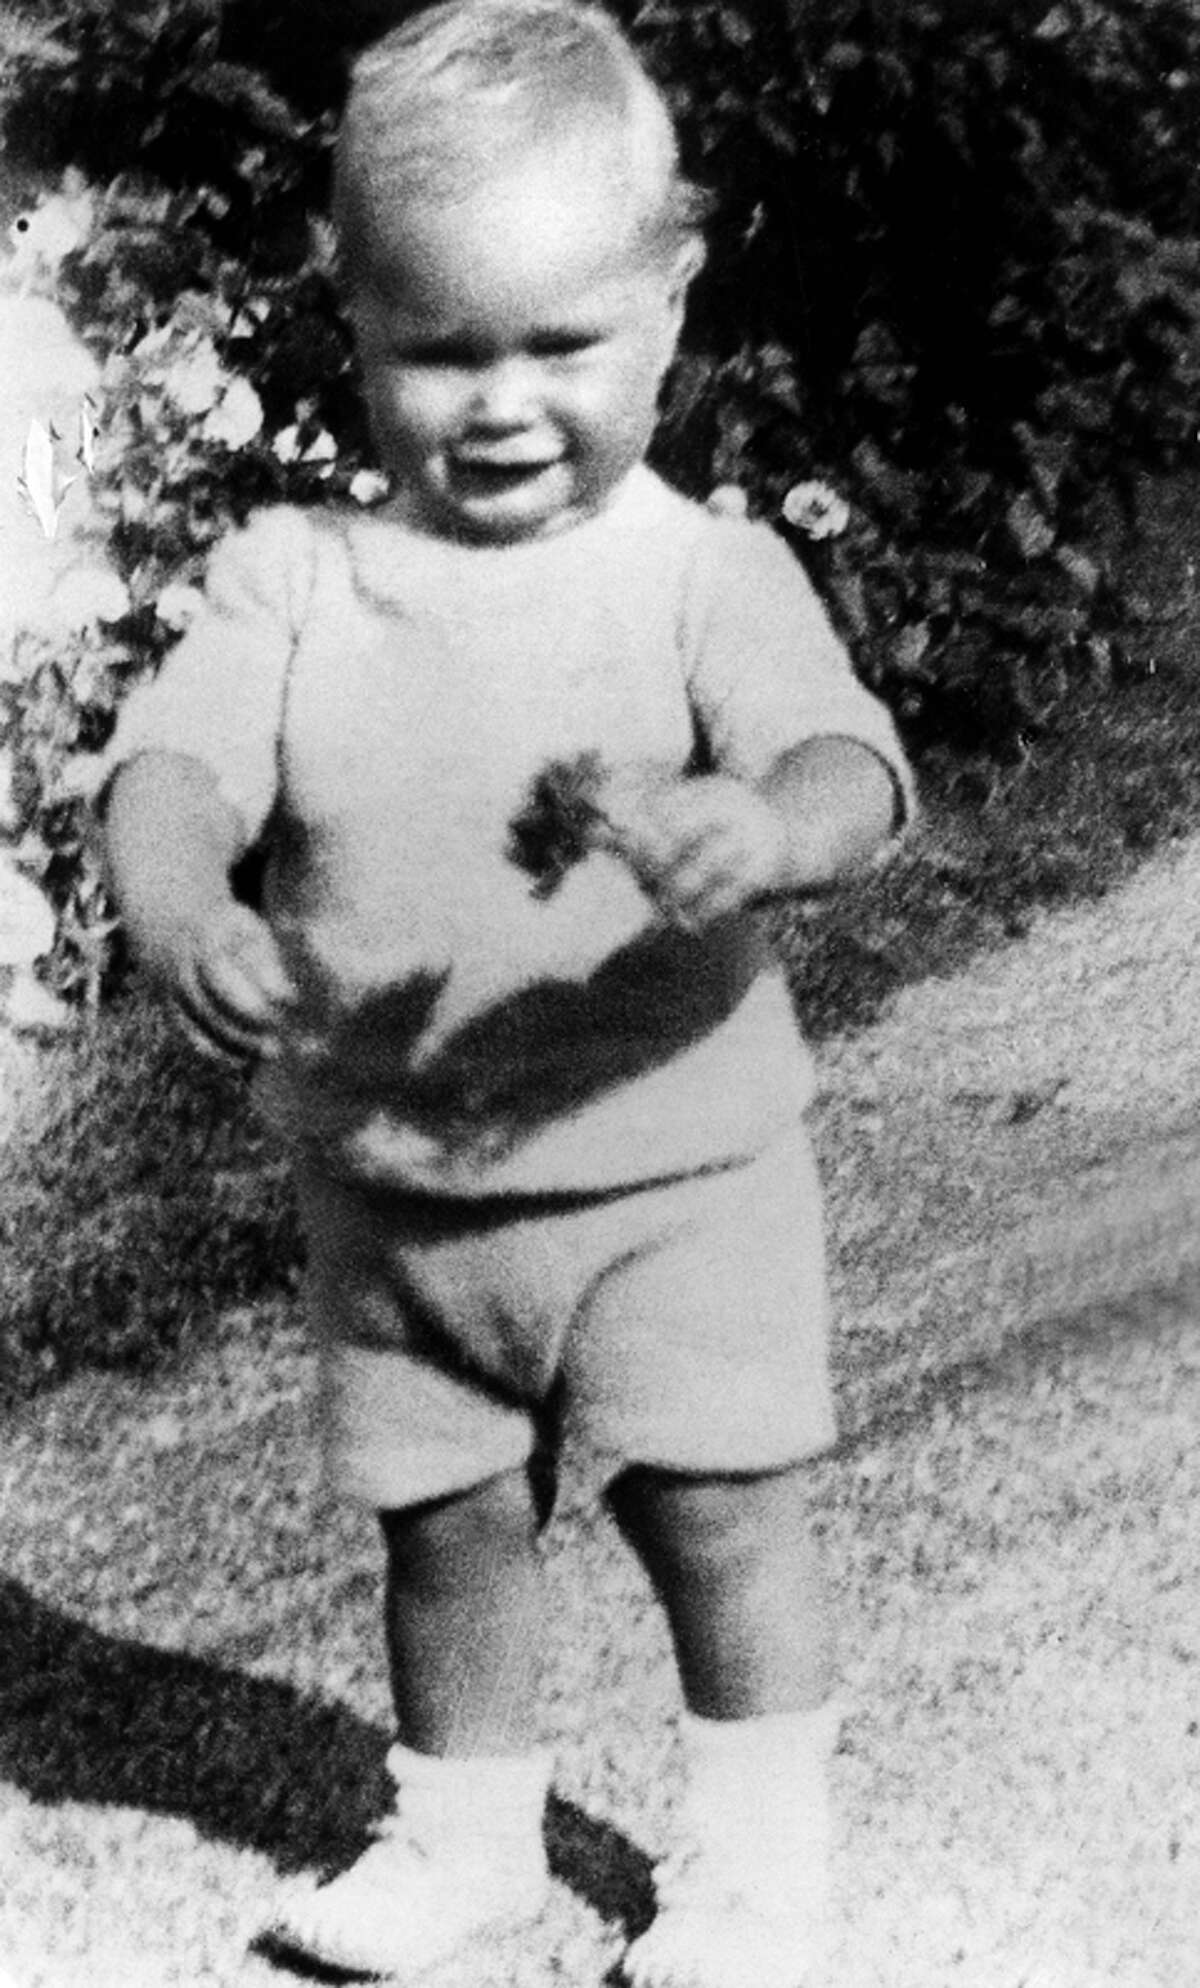 JUNE 12, 1924: Born in Milton, Mass., the second child (of five) of Prescott and Dorothy Walker Bush. Dorothy wanted to name her son after her father, George Herbert Walker, but couldn’t decide between George Herbert Bush and George Walker Bush, so young George got two middle names. 1937-1942: Attends Phillips Academy in Andover, Mass. 1940: Contracts a staph infection that requires hospitalization, forcing him to repeat a year in Andover. Pictured: George H.W. Bush is pictured when he was one and a half year old. Born 12 June 1924 in Milton, Massachusetts.